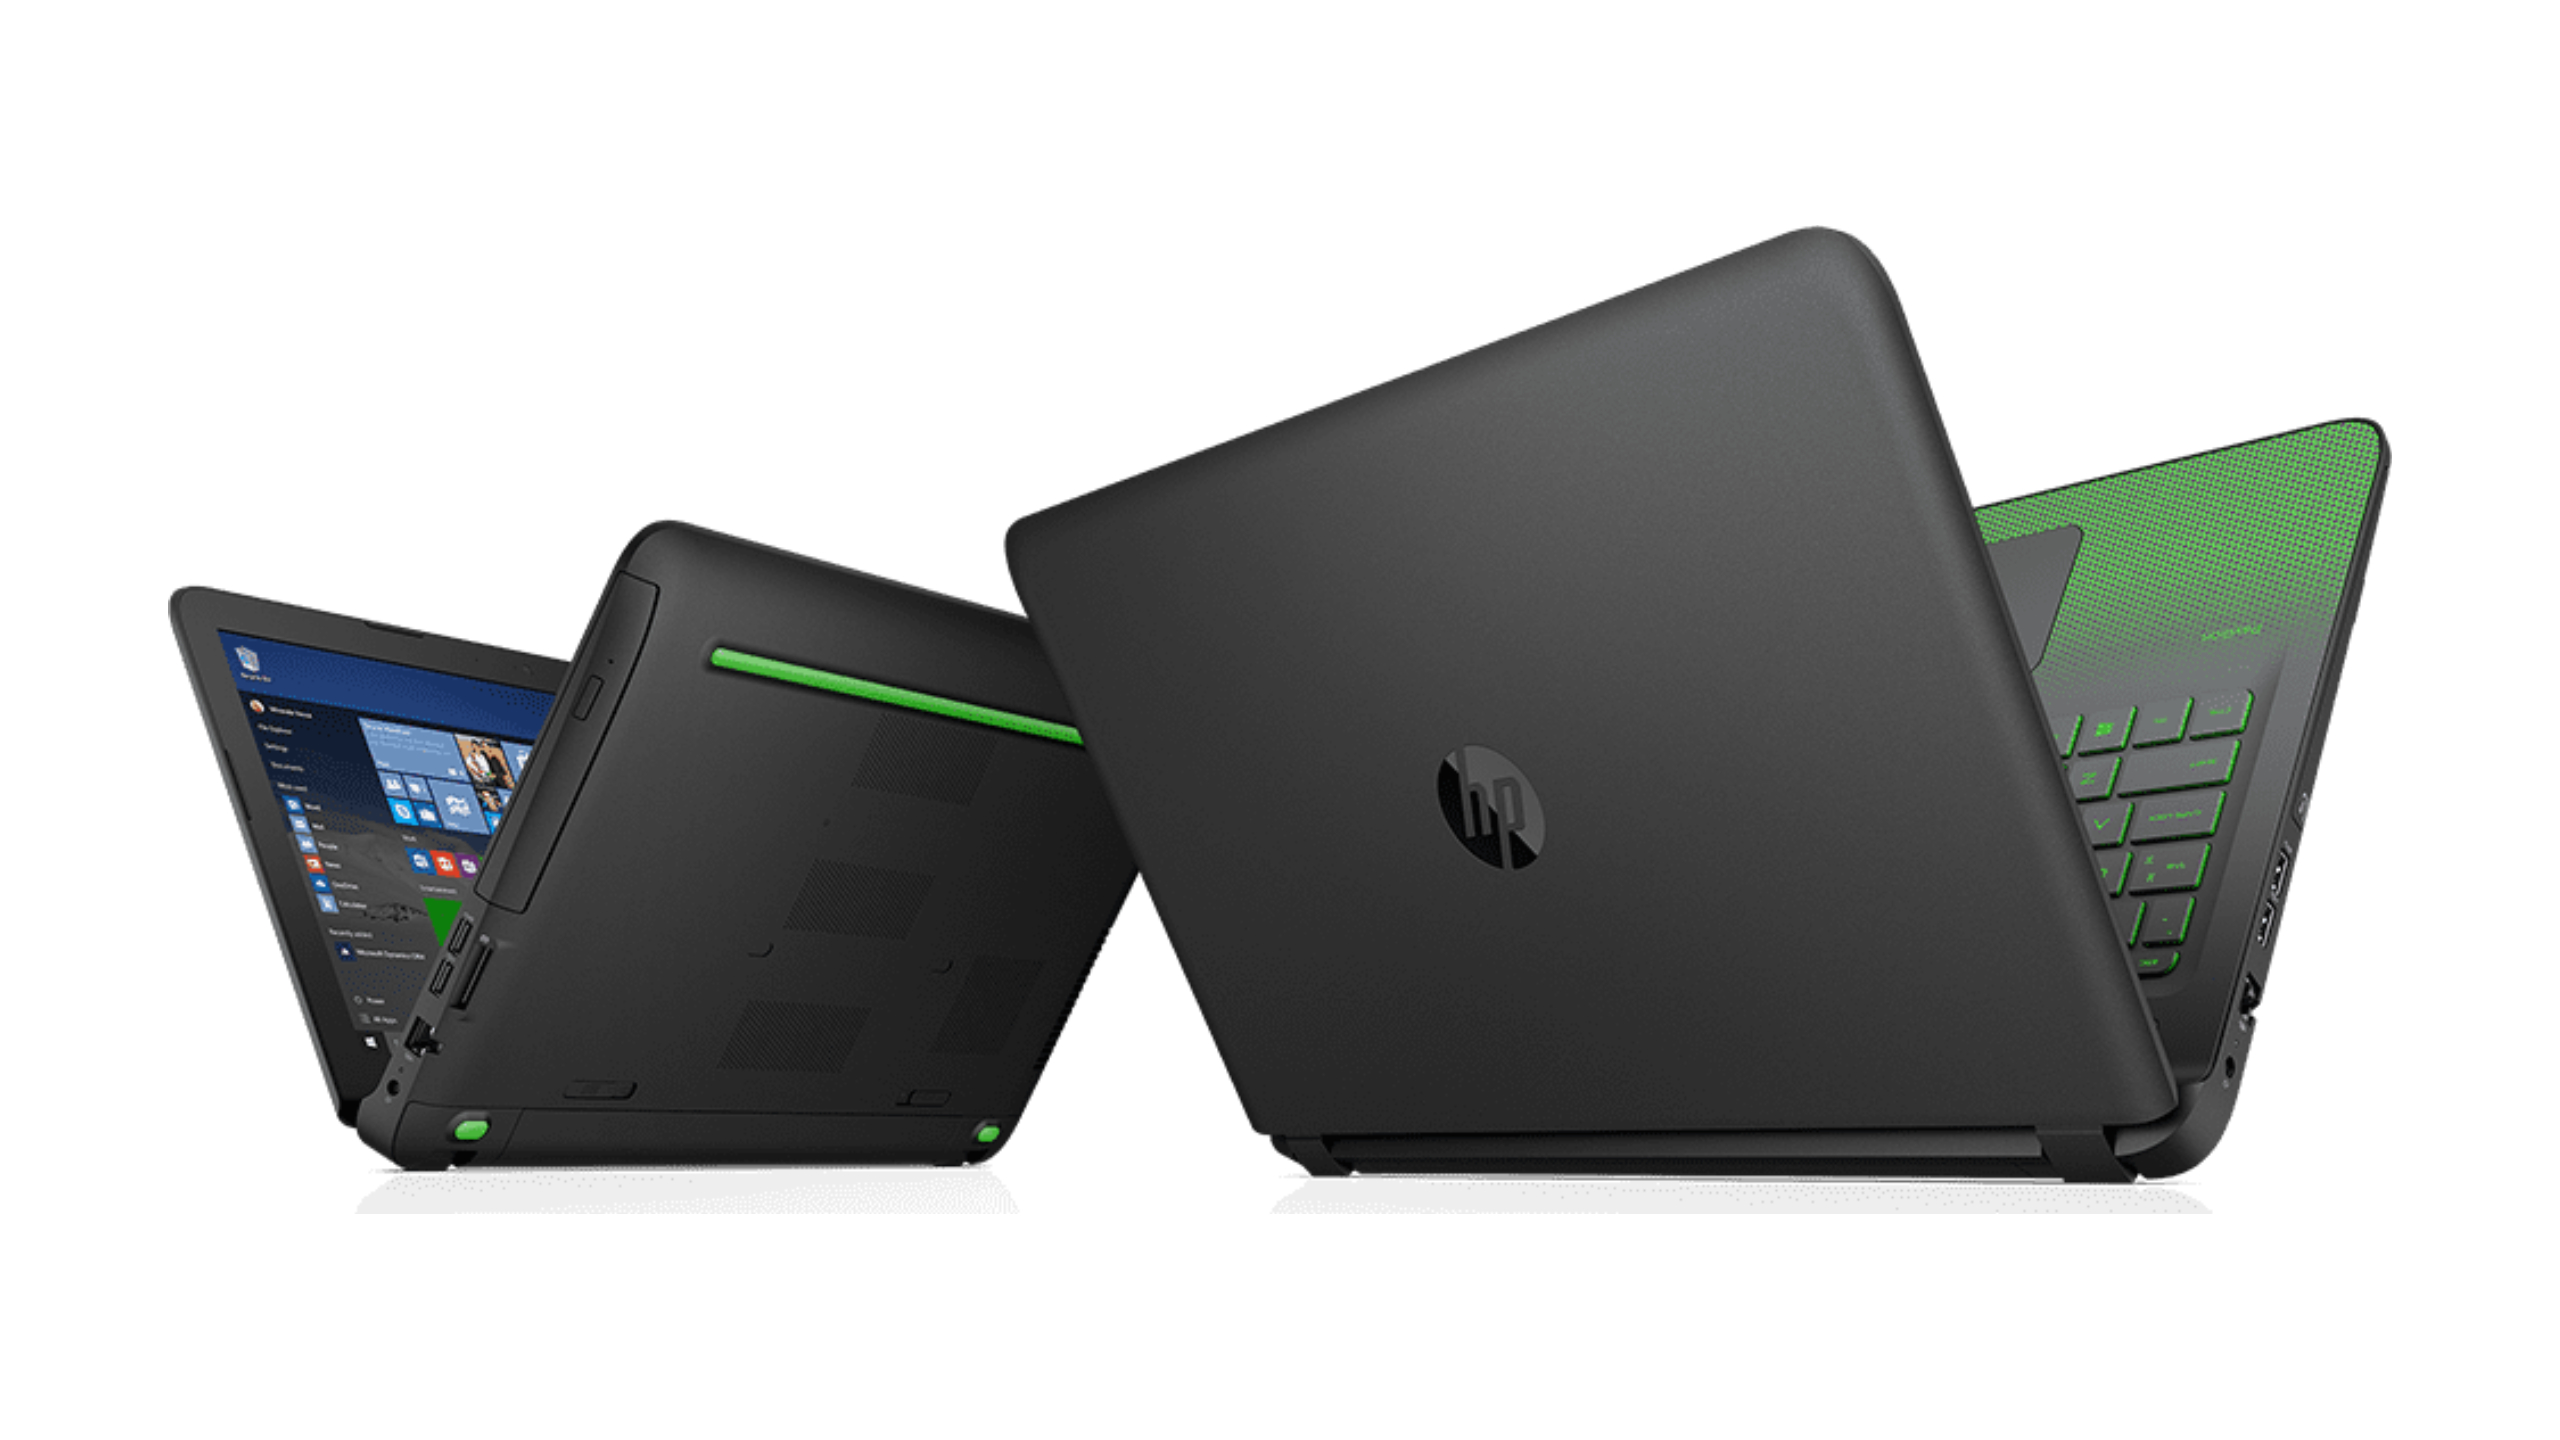 Is the HP Pavilion Laptop Good for Gaming?